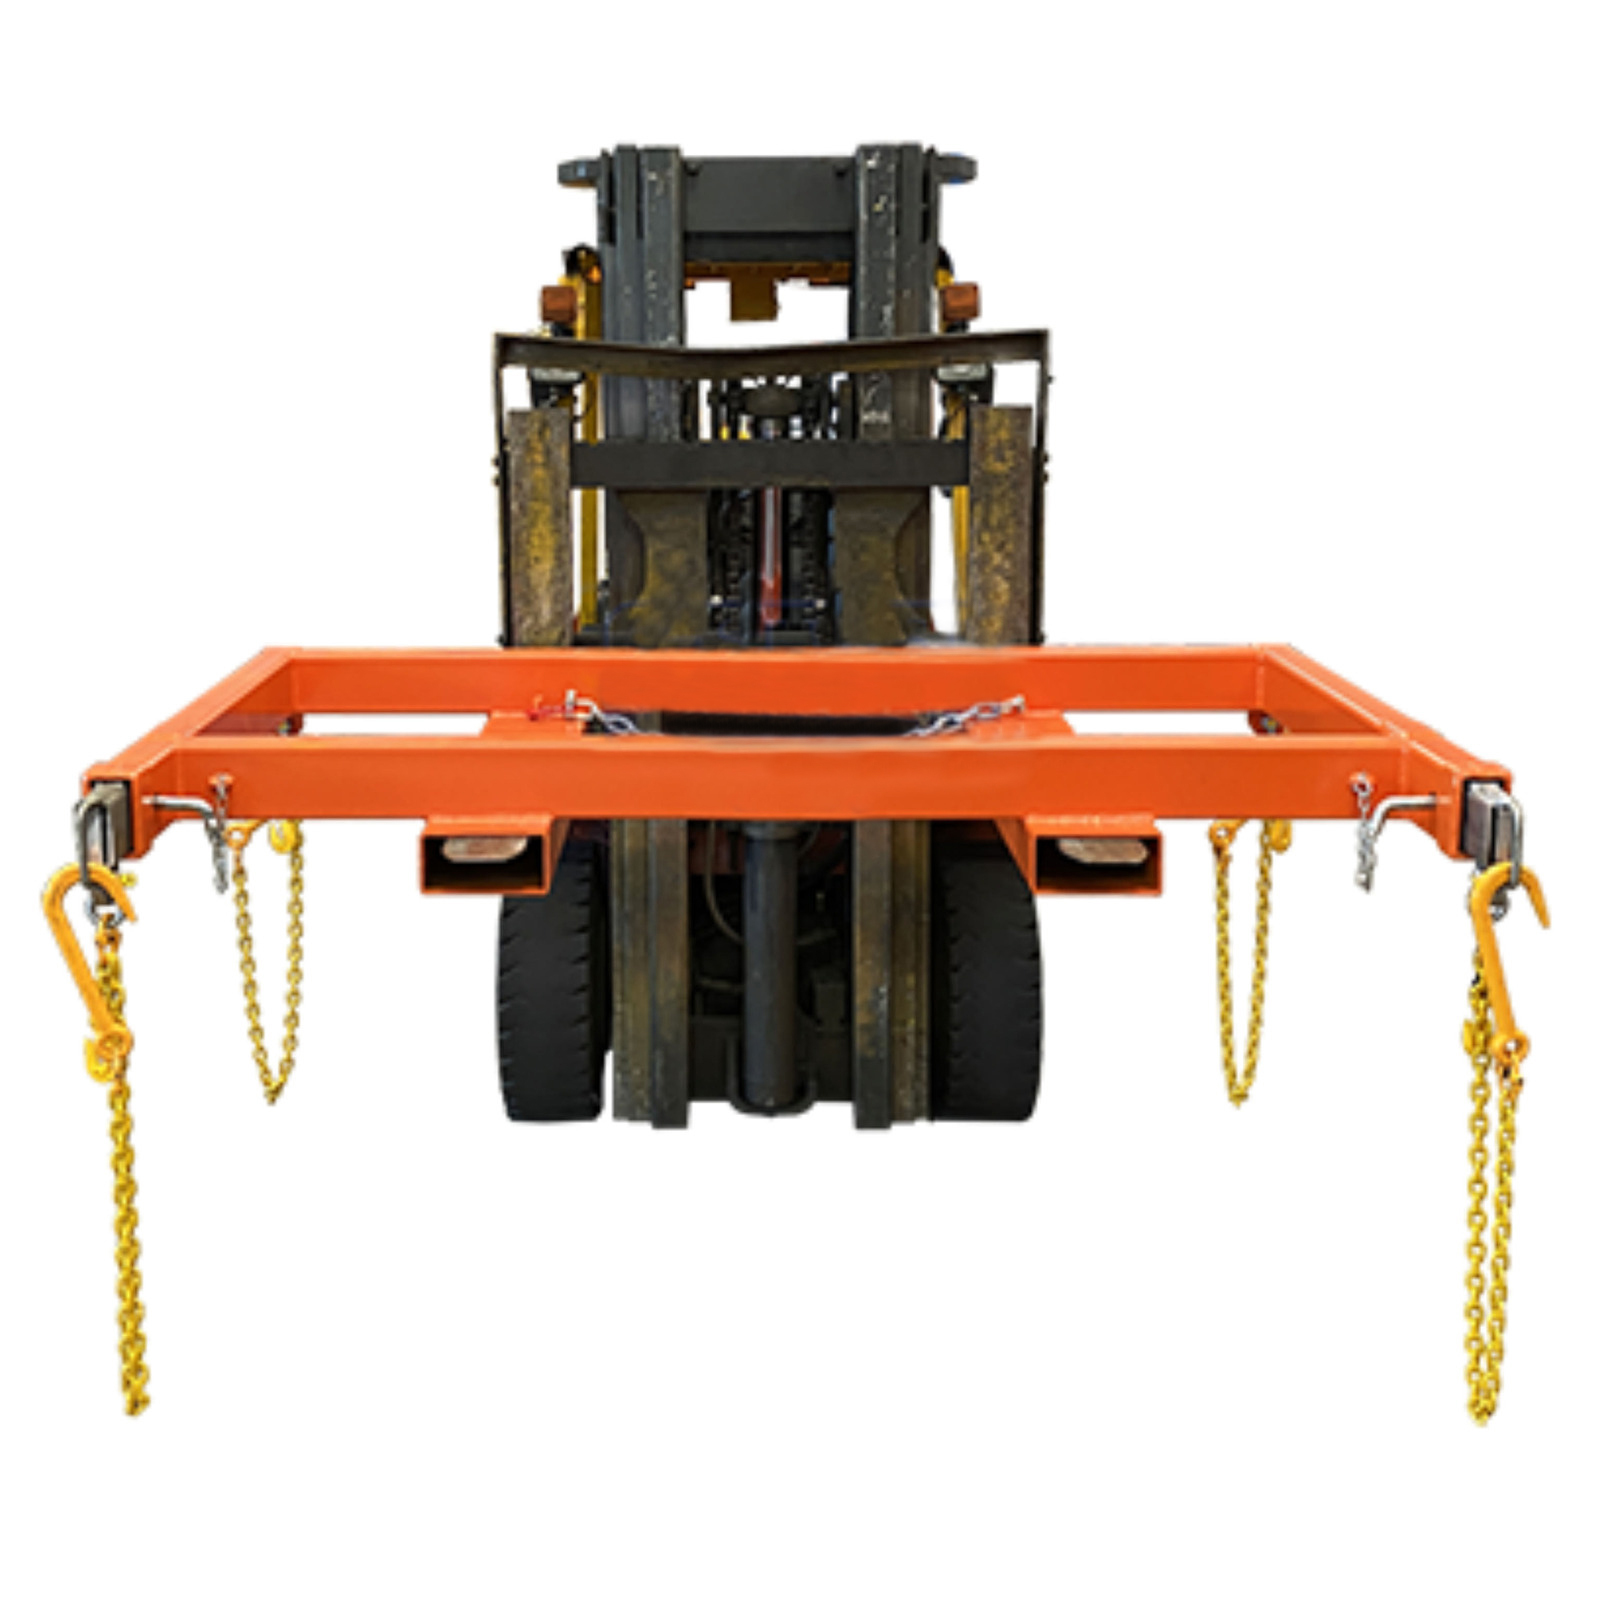 Mesh Lifter - 2000mm wide hook centres